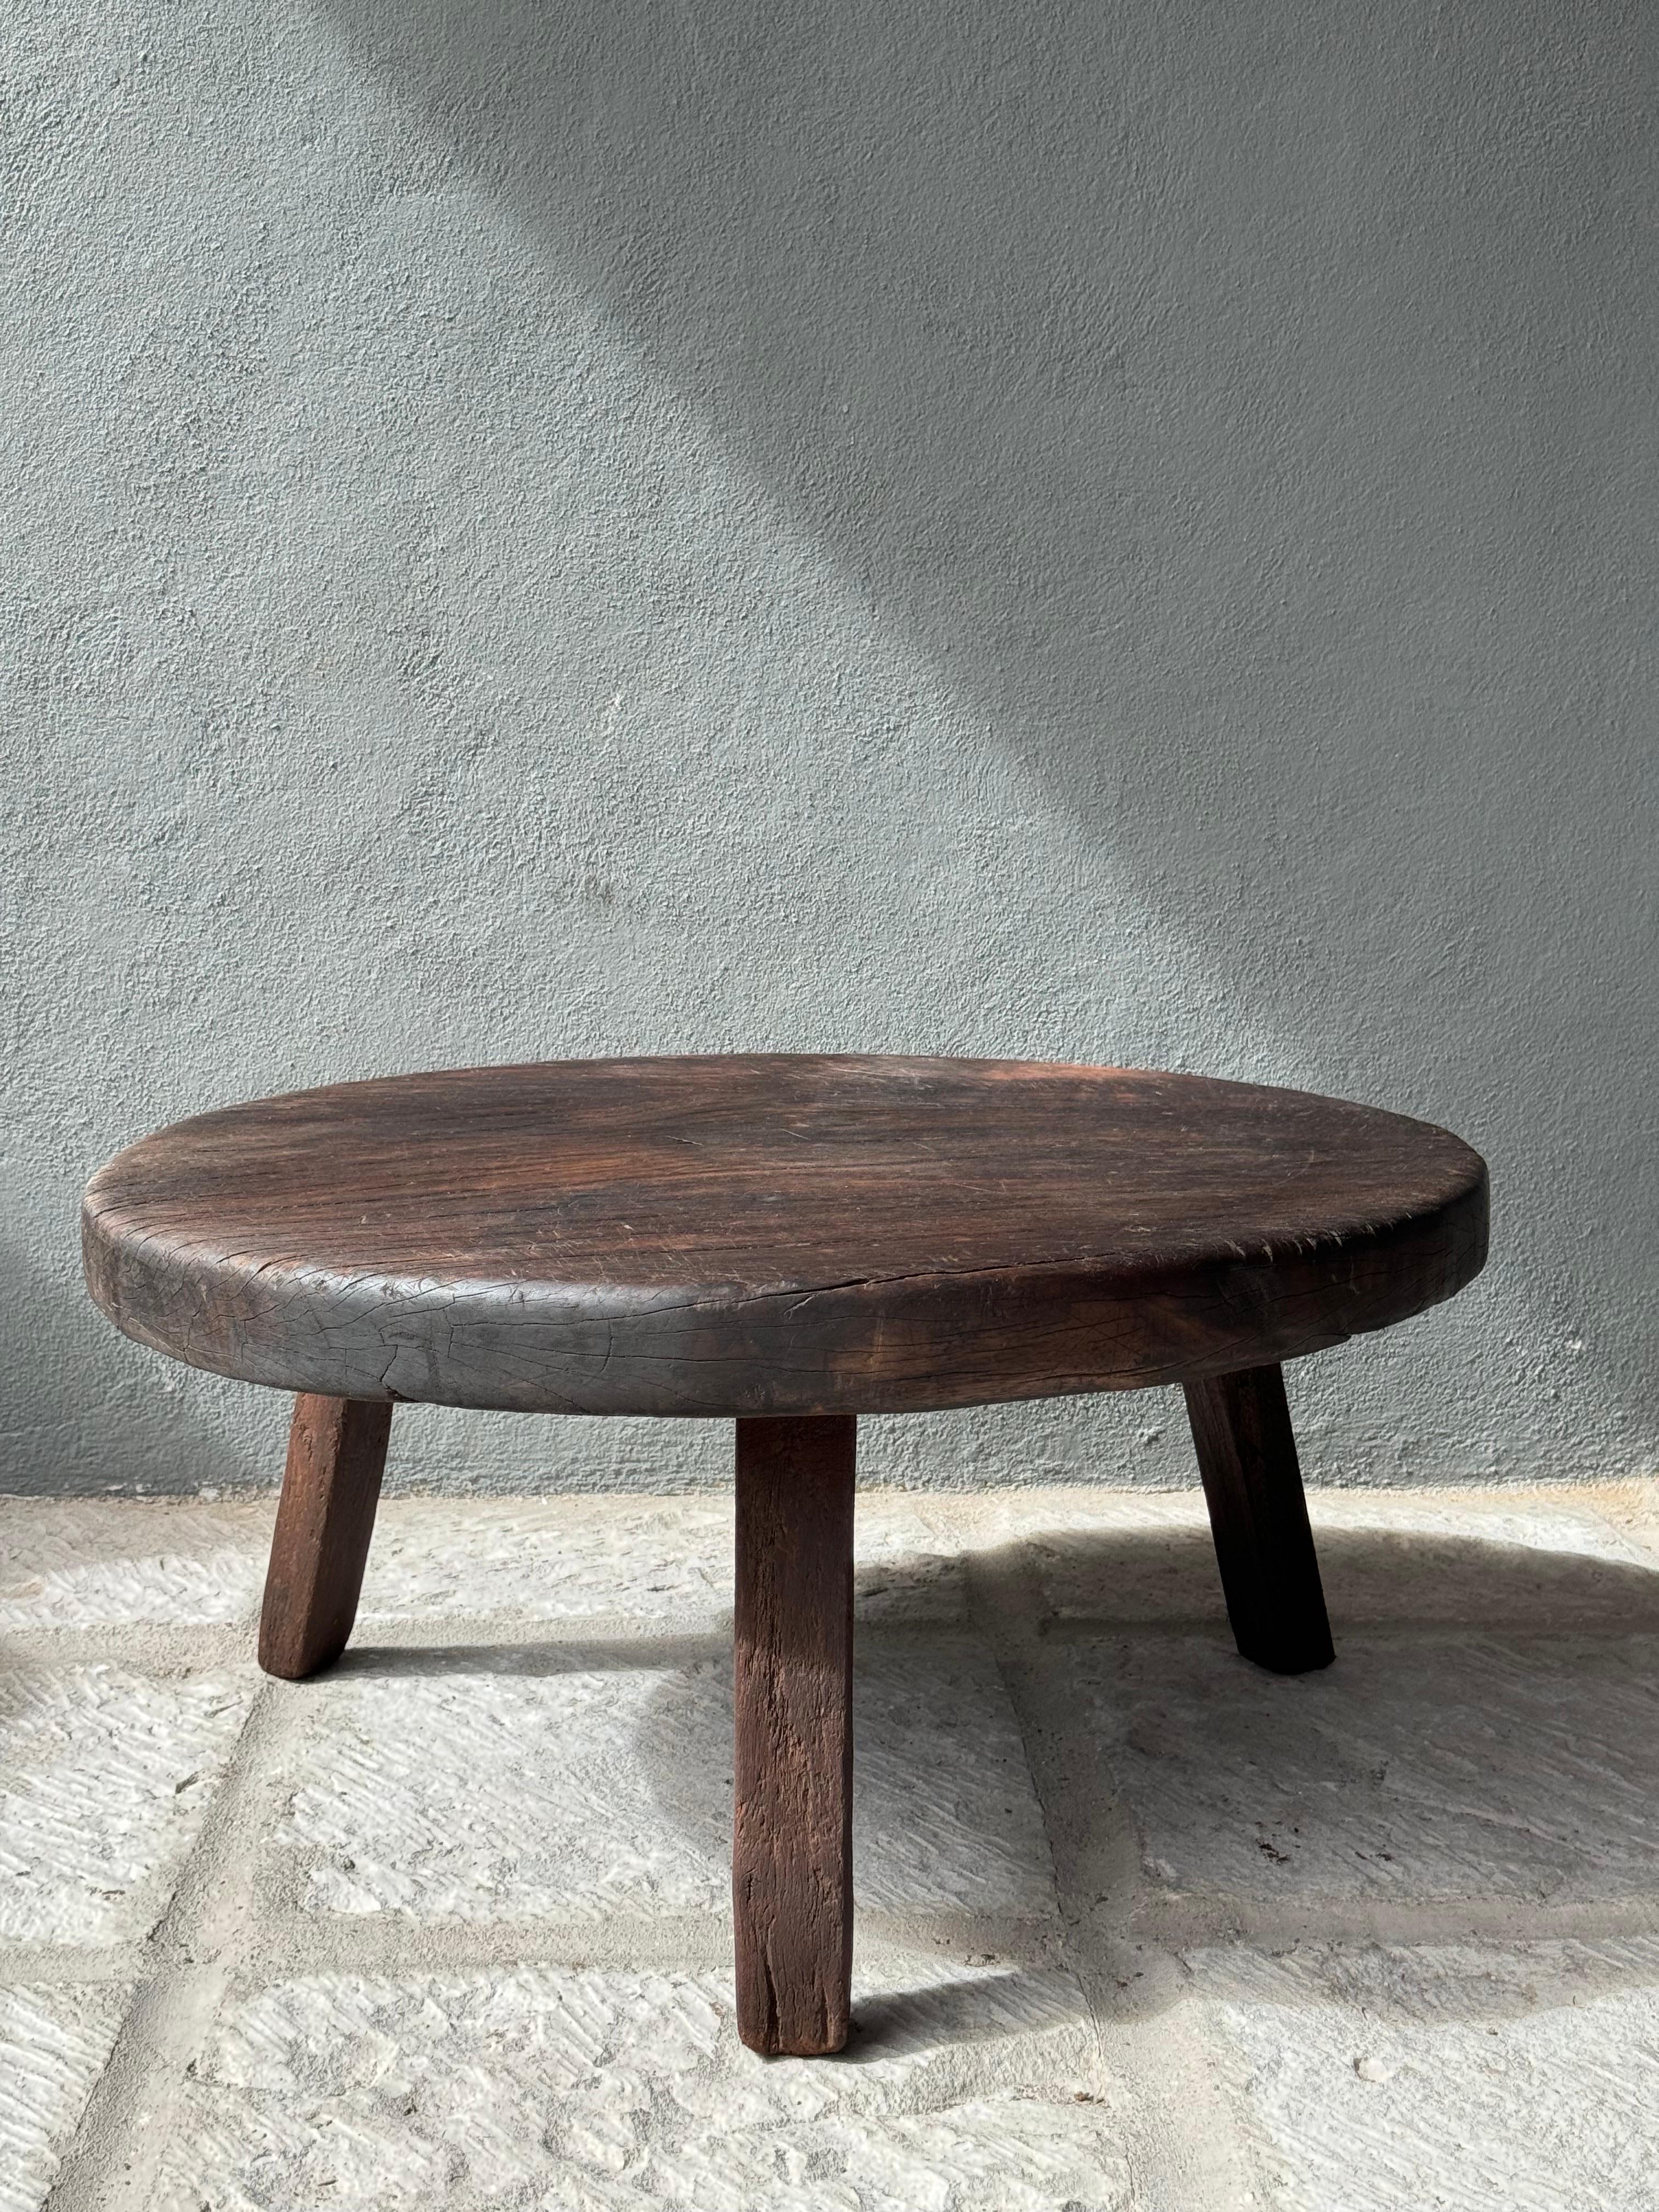 Late 20th Century Primitive Hardwood Round Table From Central Yucatan, Mexico, Mid 20th Century For Sale